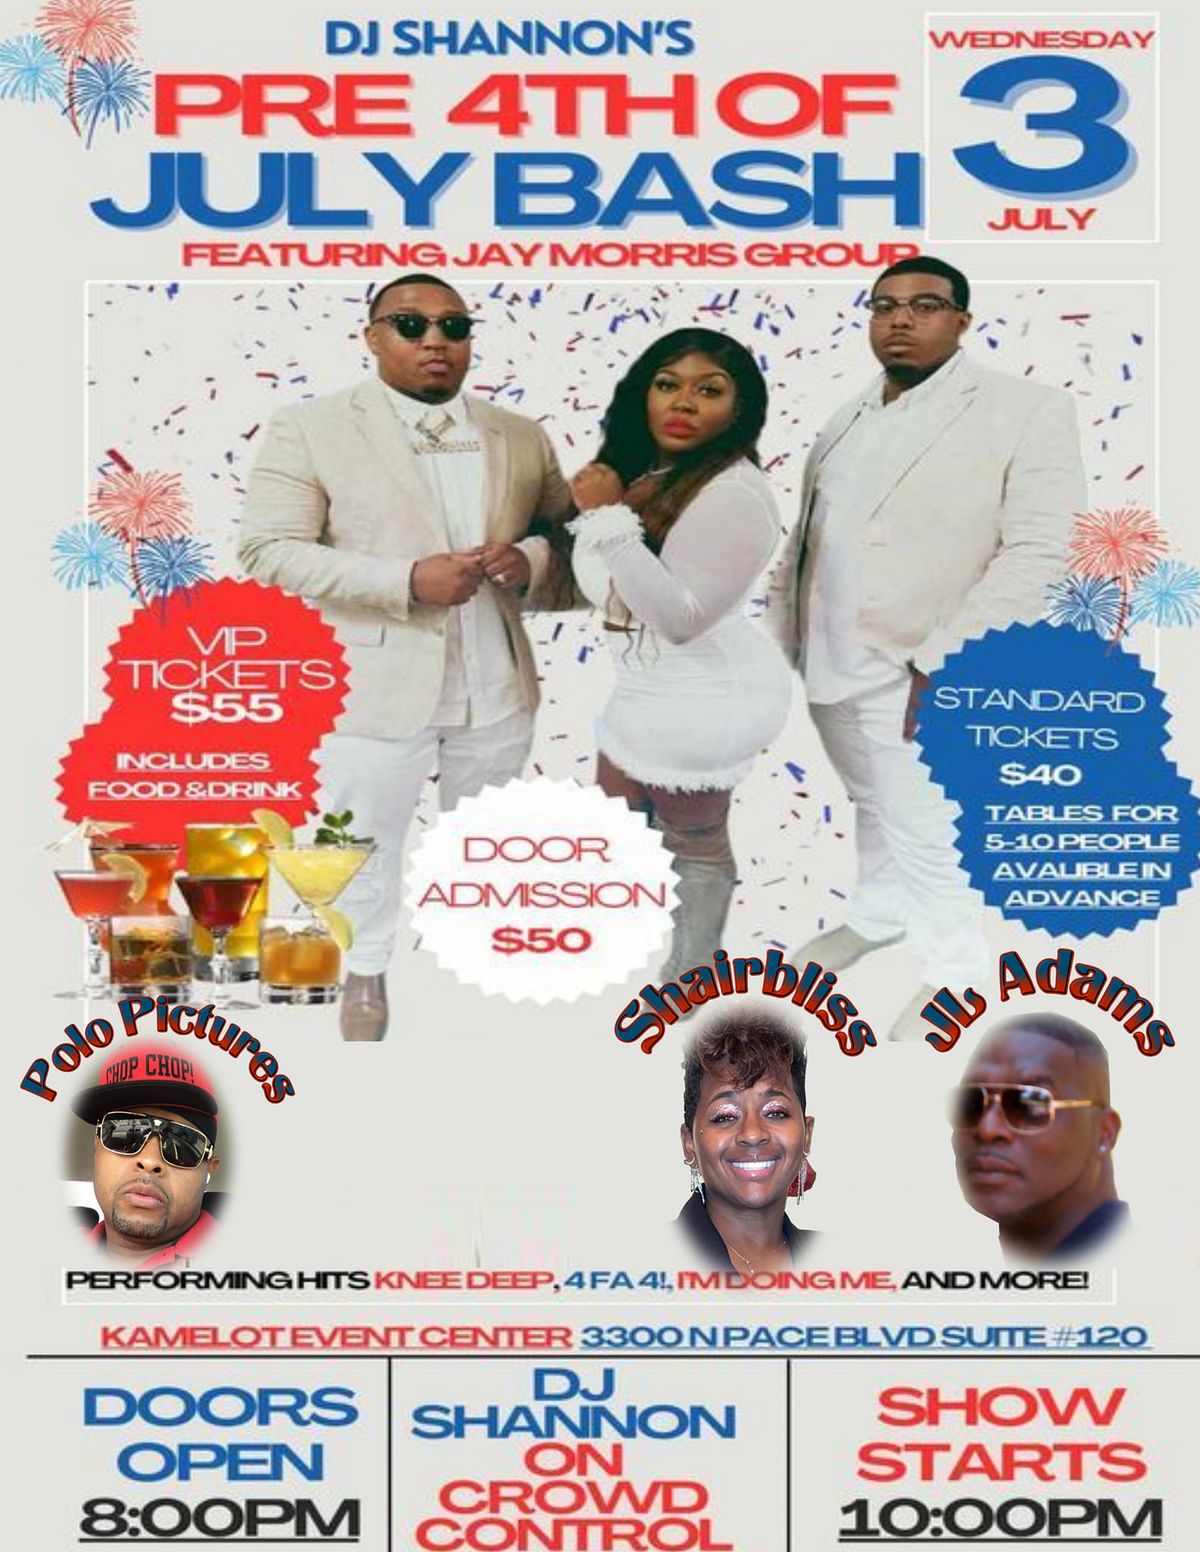 PRE 4TH  JULYBASH  ON JULY 3RD - FEATURING JAY MORRIS GROUP 